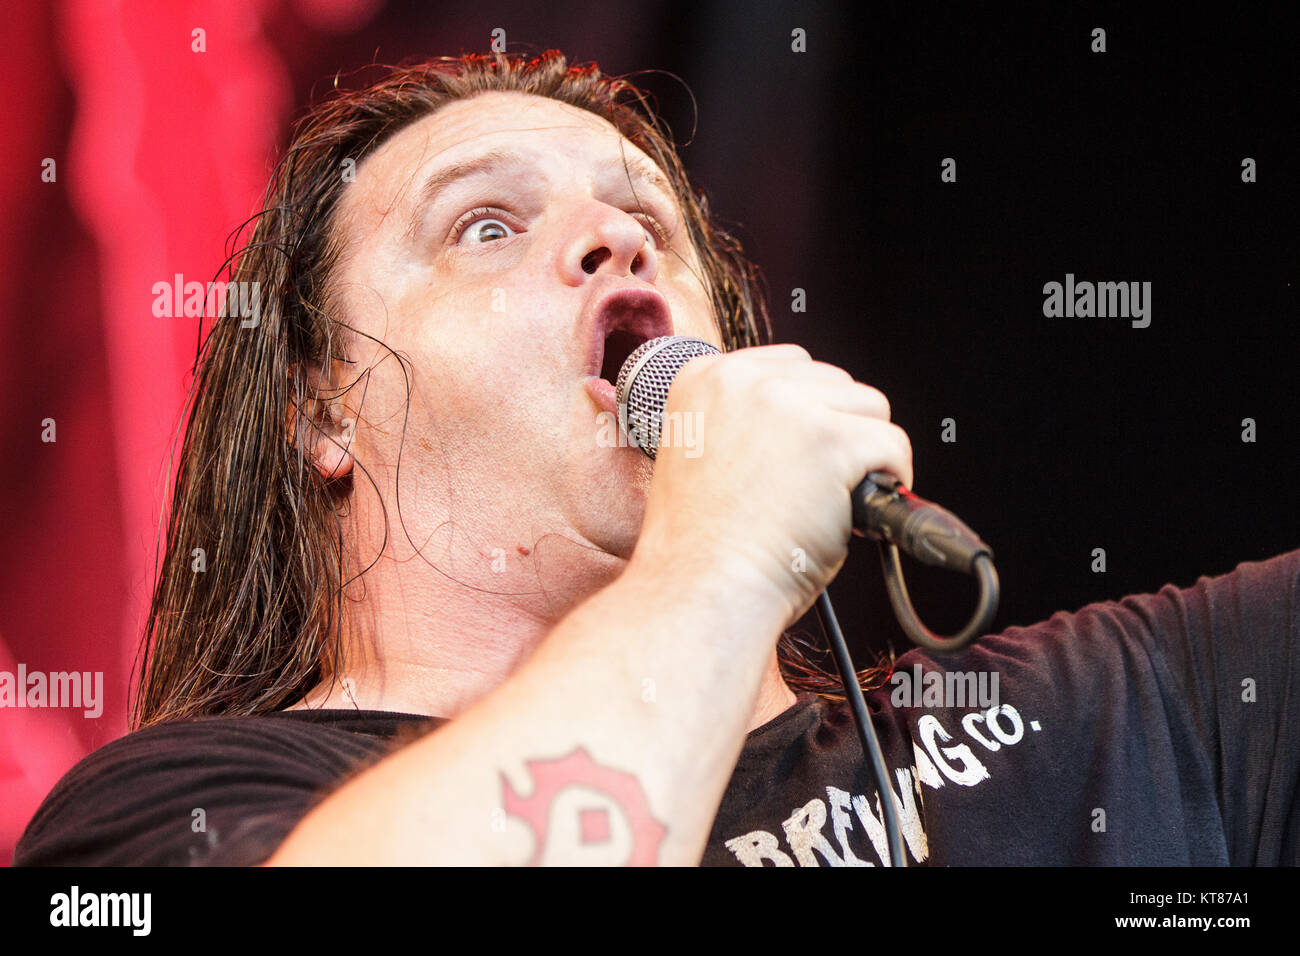 The American death metal band Cannibal Corpse performs a live concert at the Danish heavy metal festival Copenhell 2015 in Copenhagen. Here vocalist George Fisher, also known as  Corpsgrinder, is seen live on stage. Denmark, 18/06 2015. Stock Photo